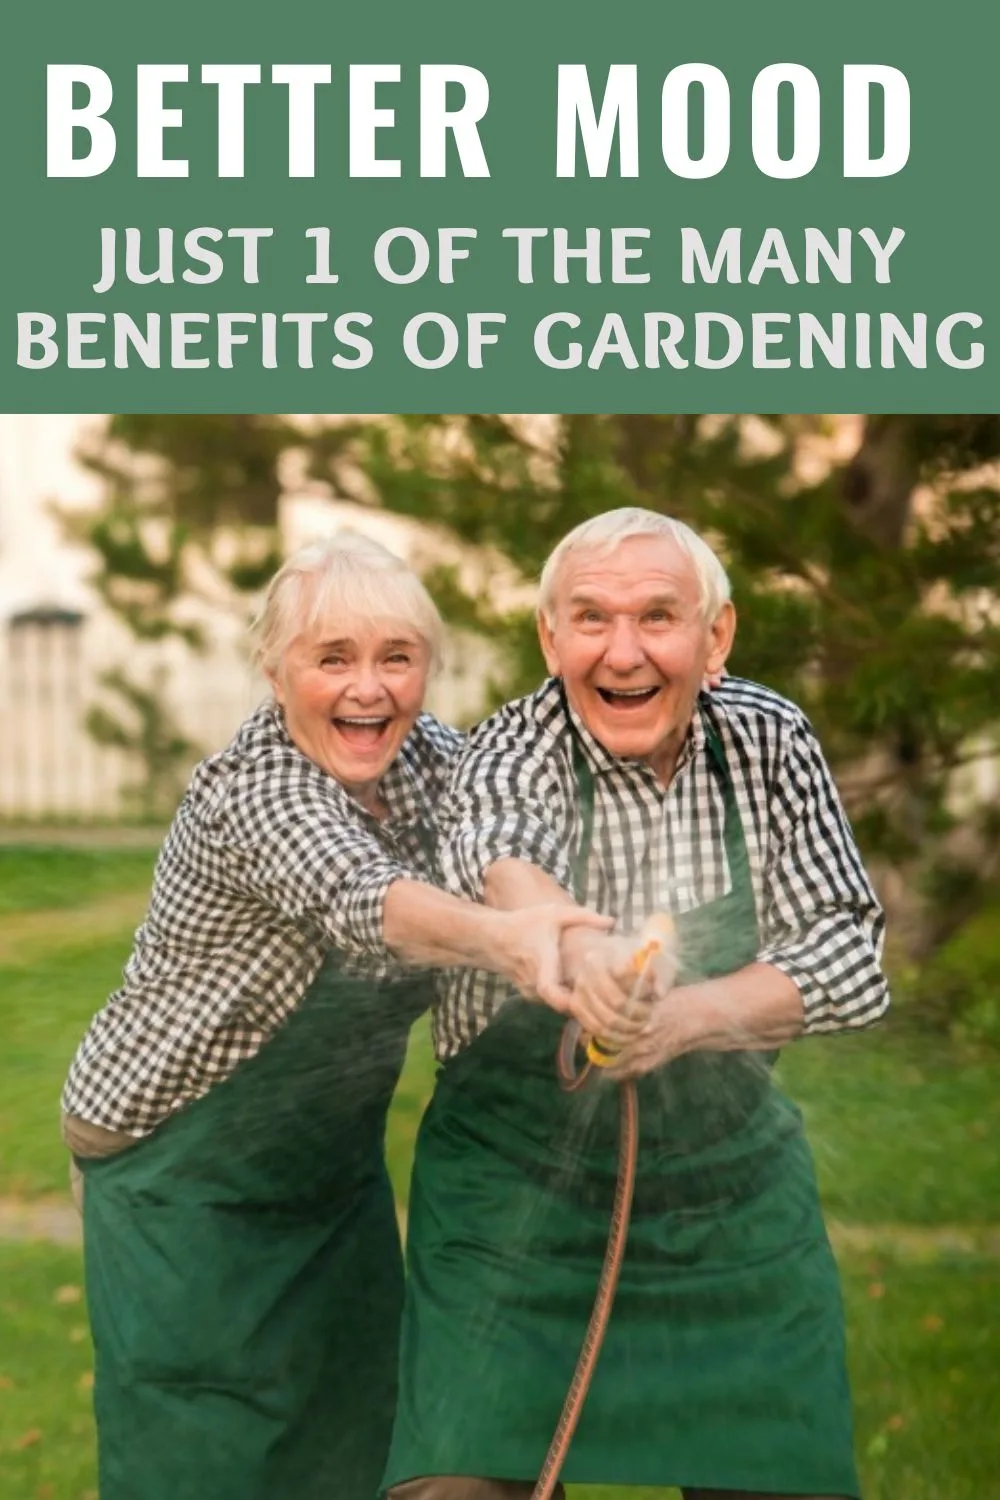 Old couple having fun with a spray hose. Better mood is just one of the benefits of gardening